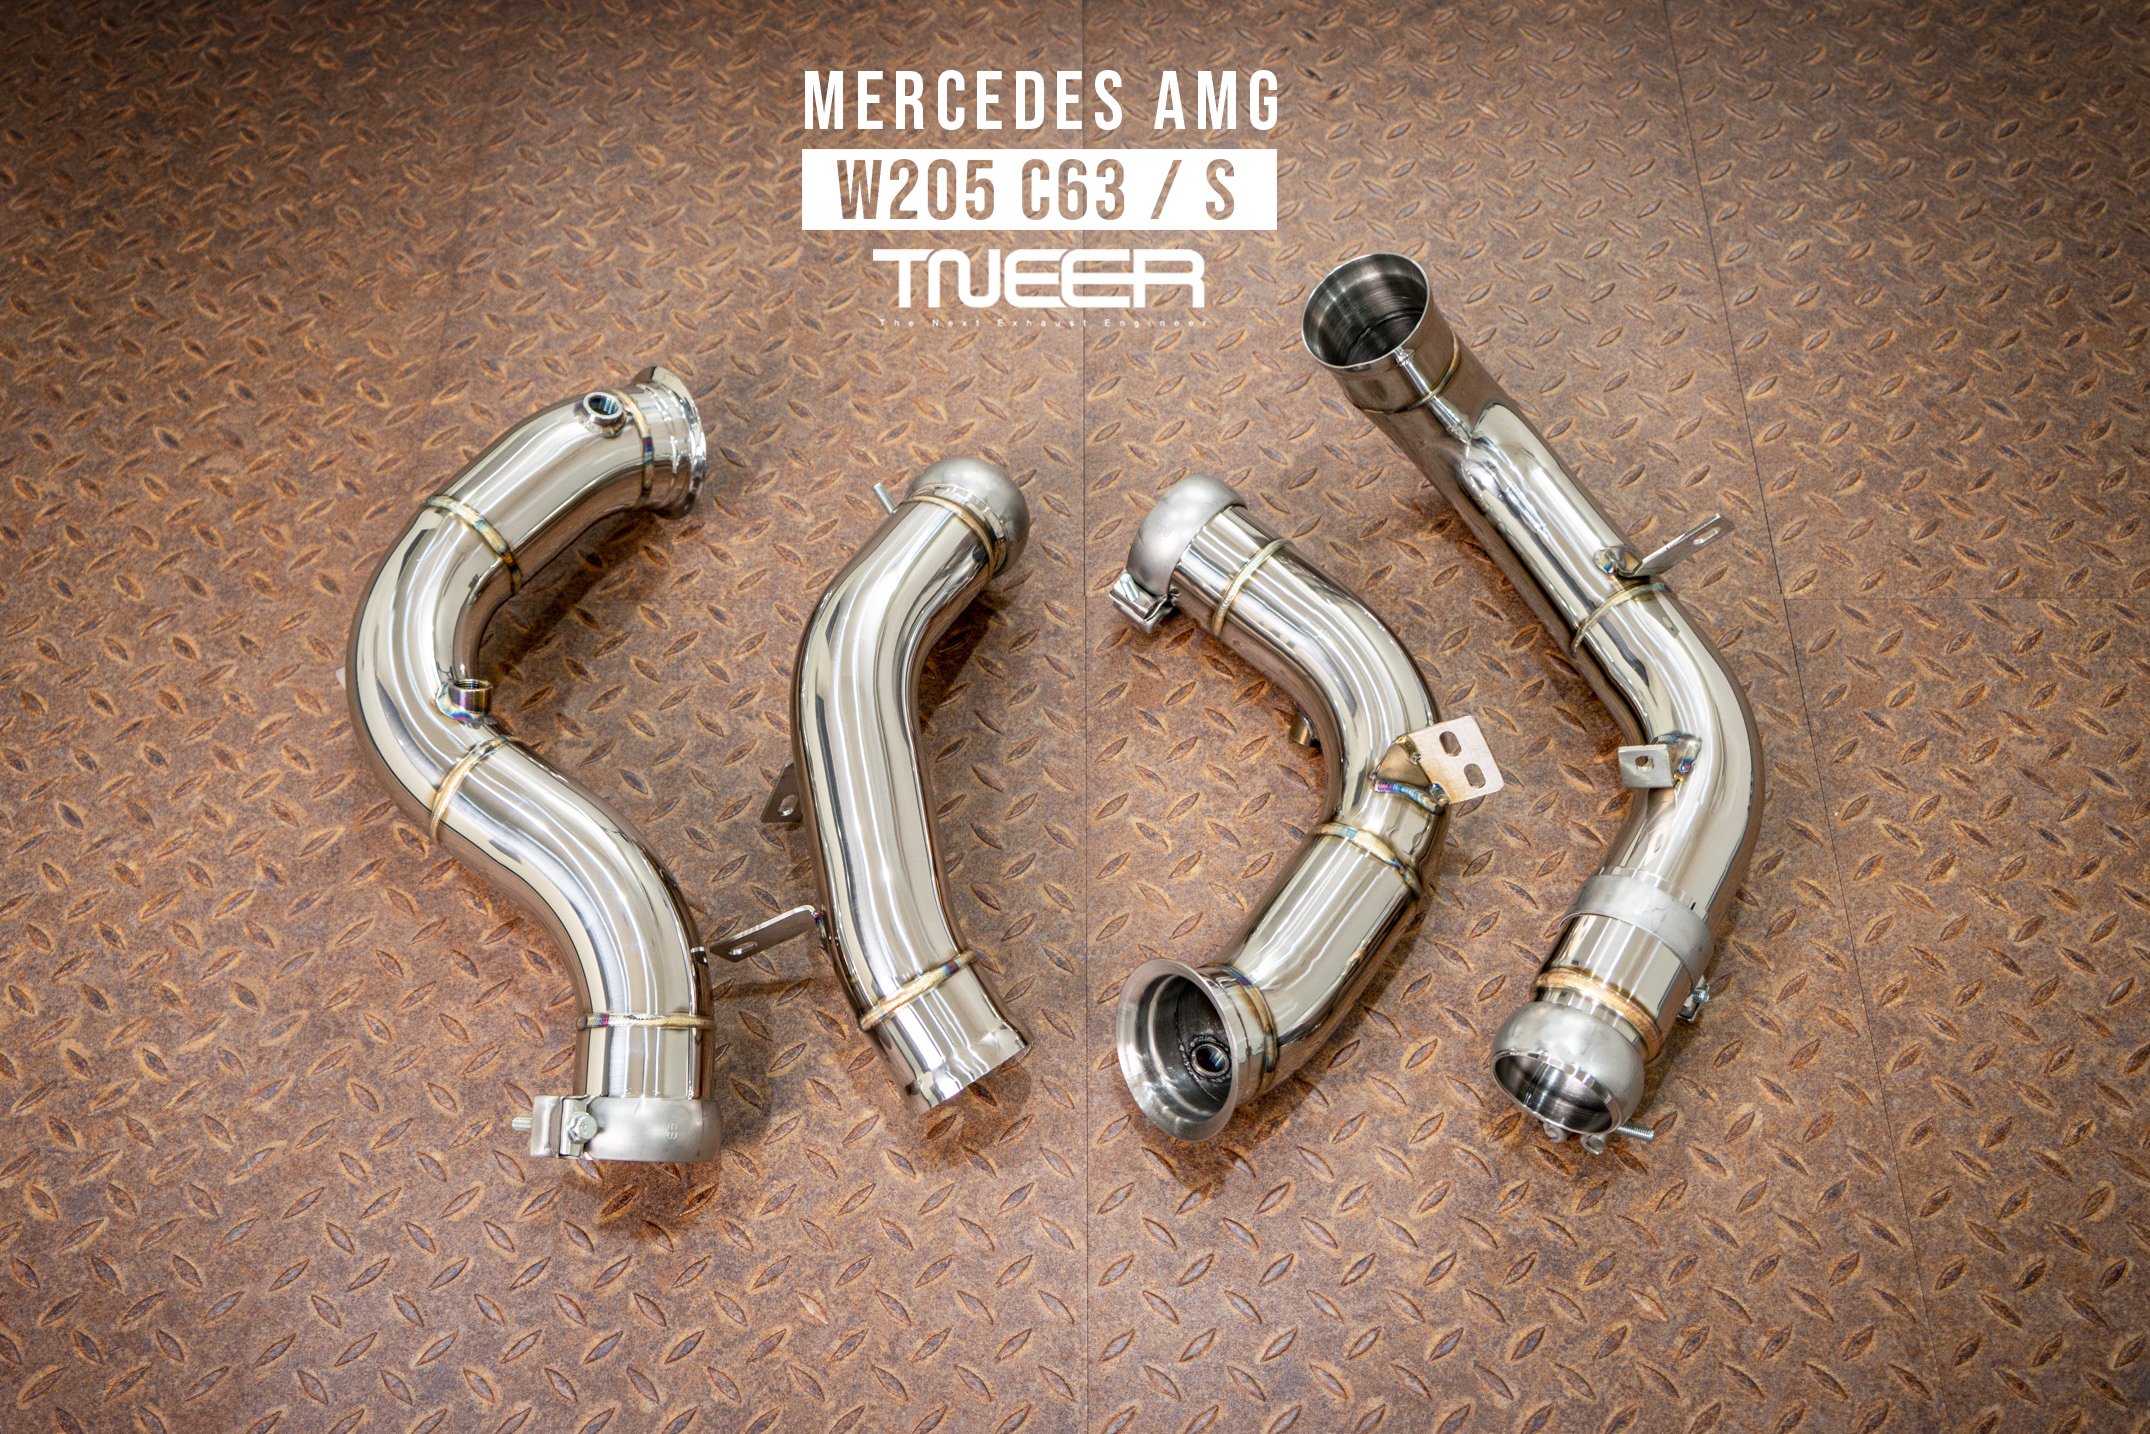 Mercedes-AMG W205 C63 TNEER High-Performance Downpipes (Not for Convertible)